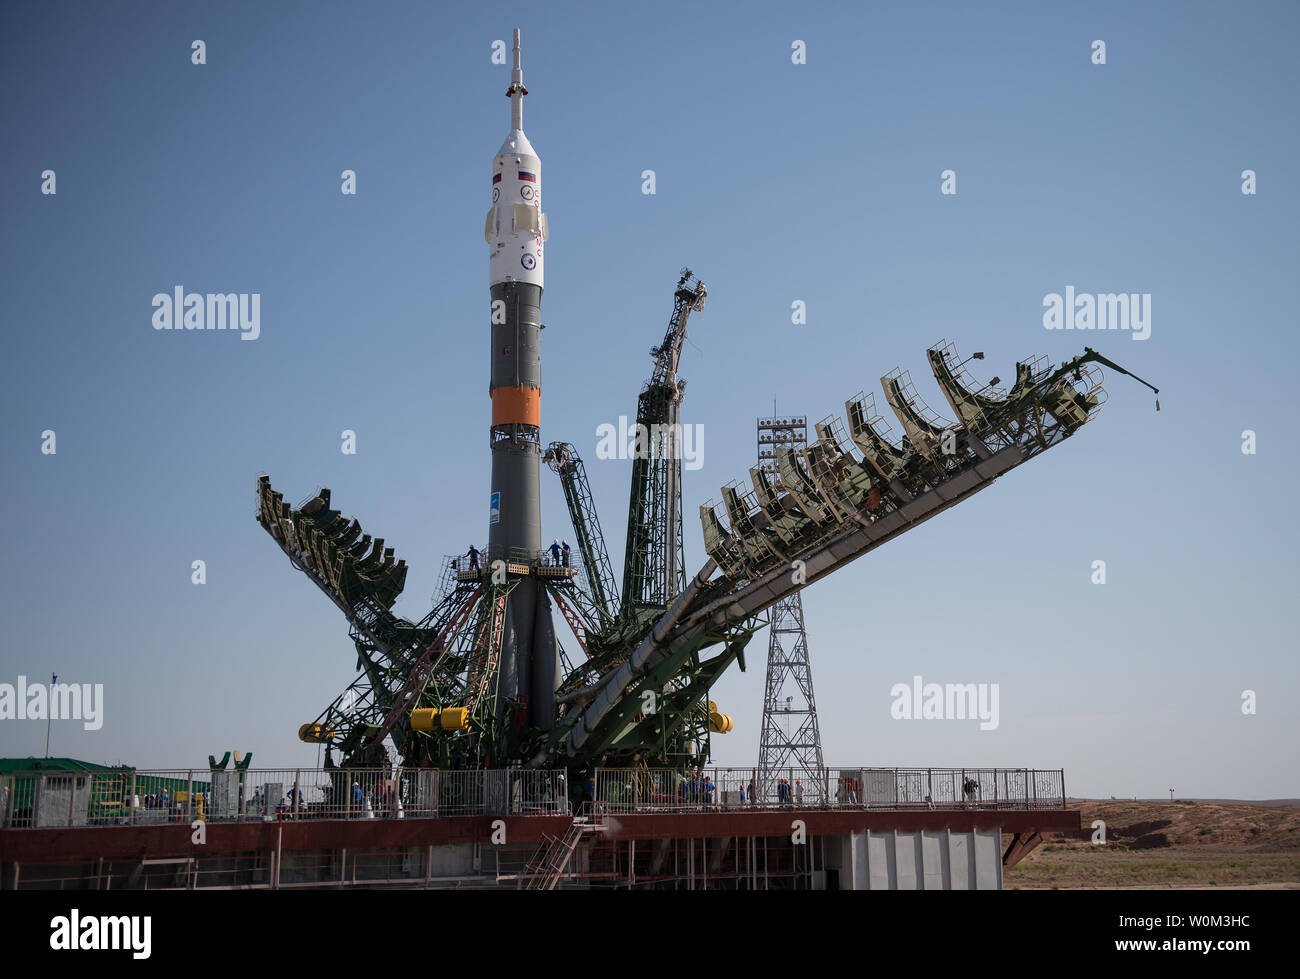 The Soyuz MS-05 spacecraft is seen as the service structure arms begin to close on the launch pad at the Baikonur Cosmodrome, Kazakhstan, on July 26, 2017. Expedition 52 flight engineer Sergei Ryazanskiy of Roscosmos, flight engineer Randy Bresnik of NASA, and flight engineer Paolo Nespoli of ESA (European Space Agency), are scheduled to launch to the International Space Station aboard the Soyuz spacecraft from the Baikonur Cosmodrome on July 28. NASA Photo by Joel Kowsky/UPI Stock Photo